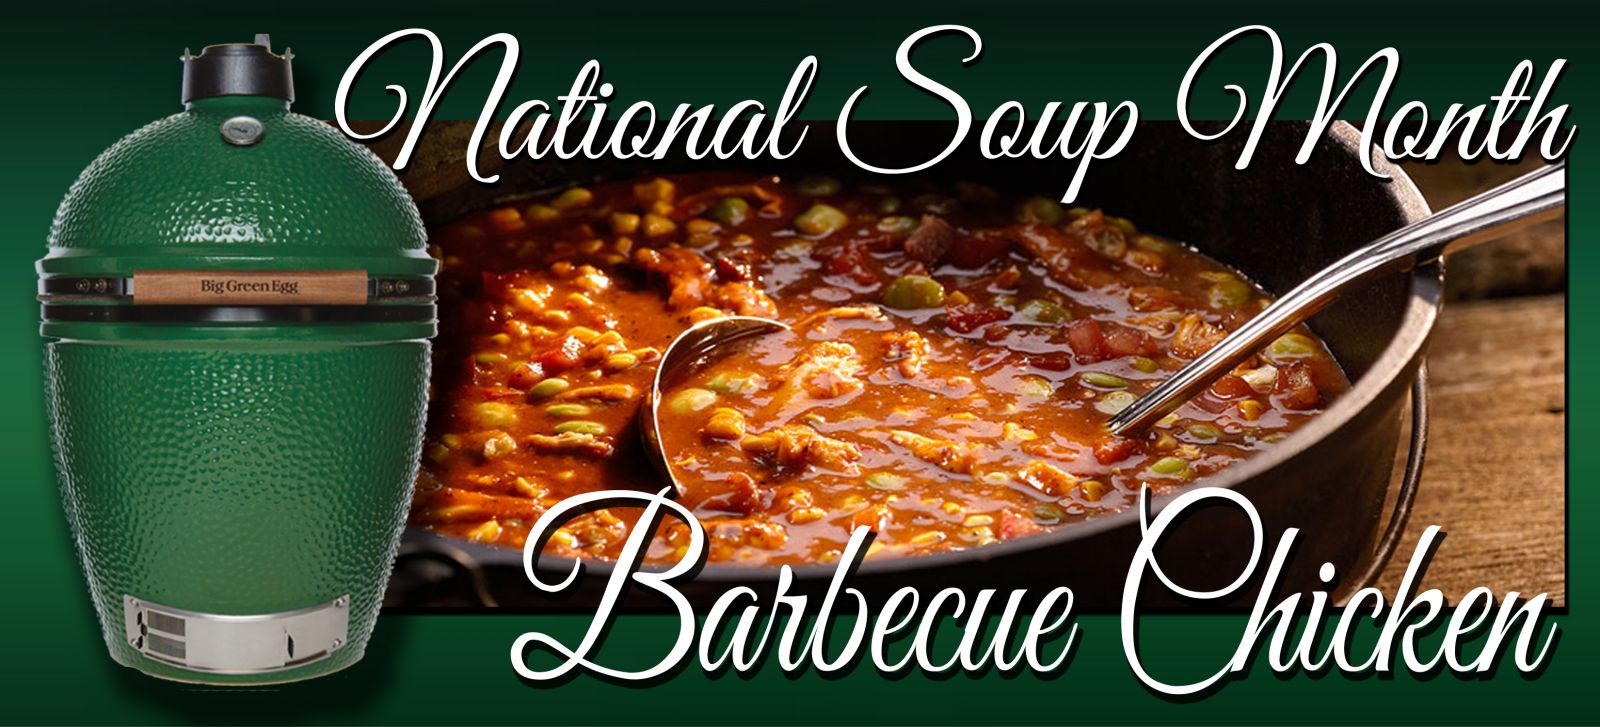 National Soup Month